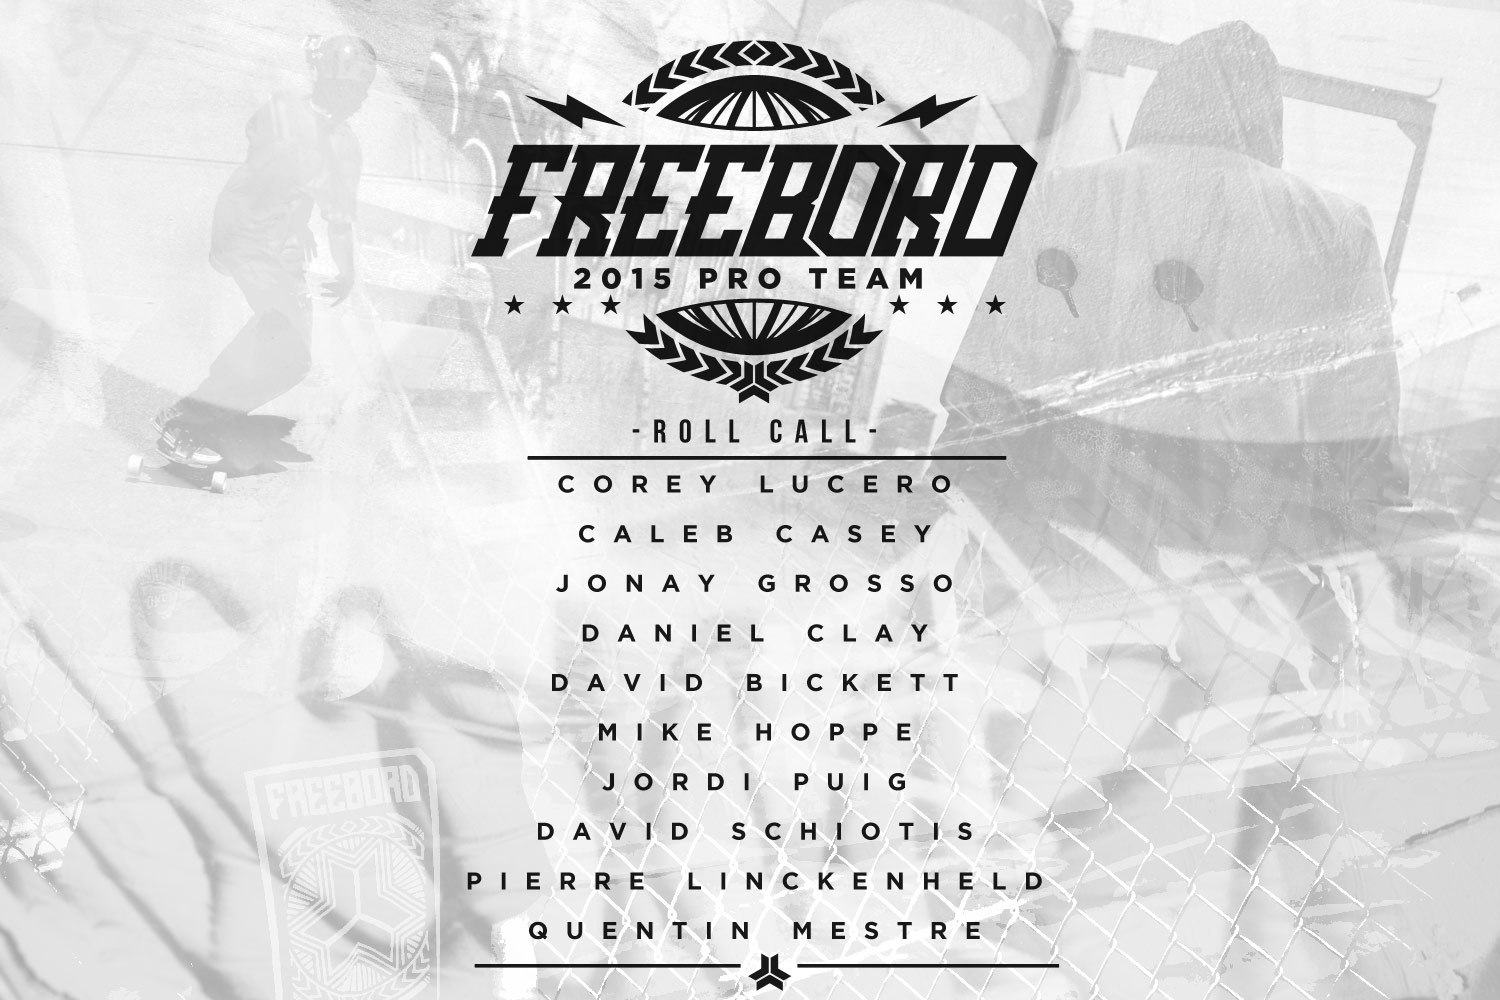 2015 Official Freebord Pro Team